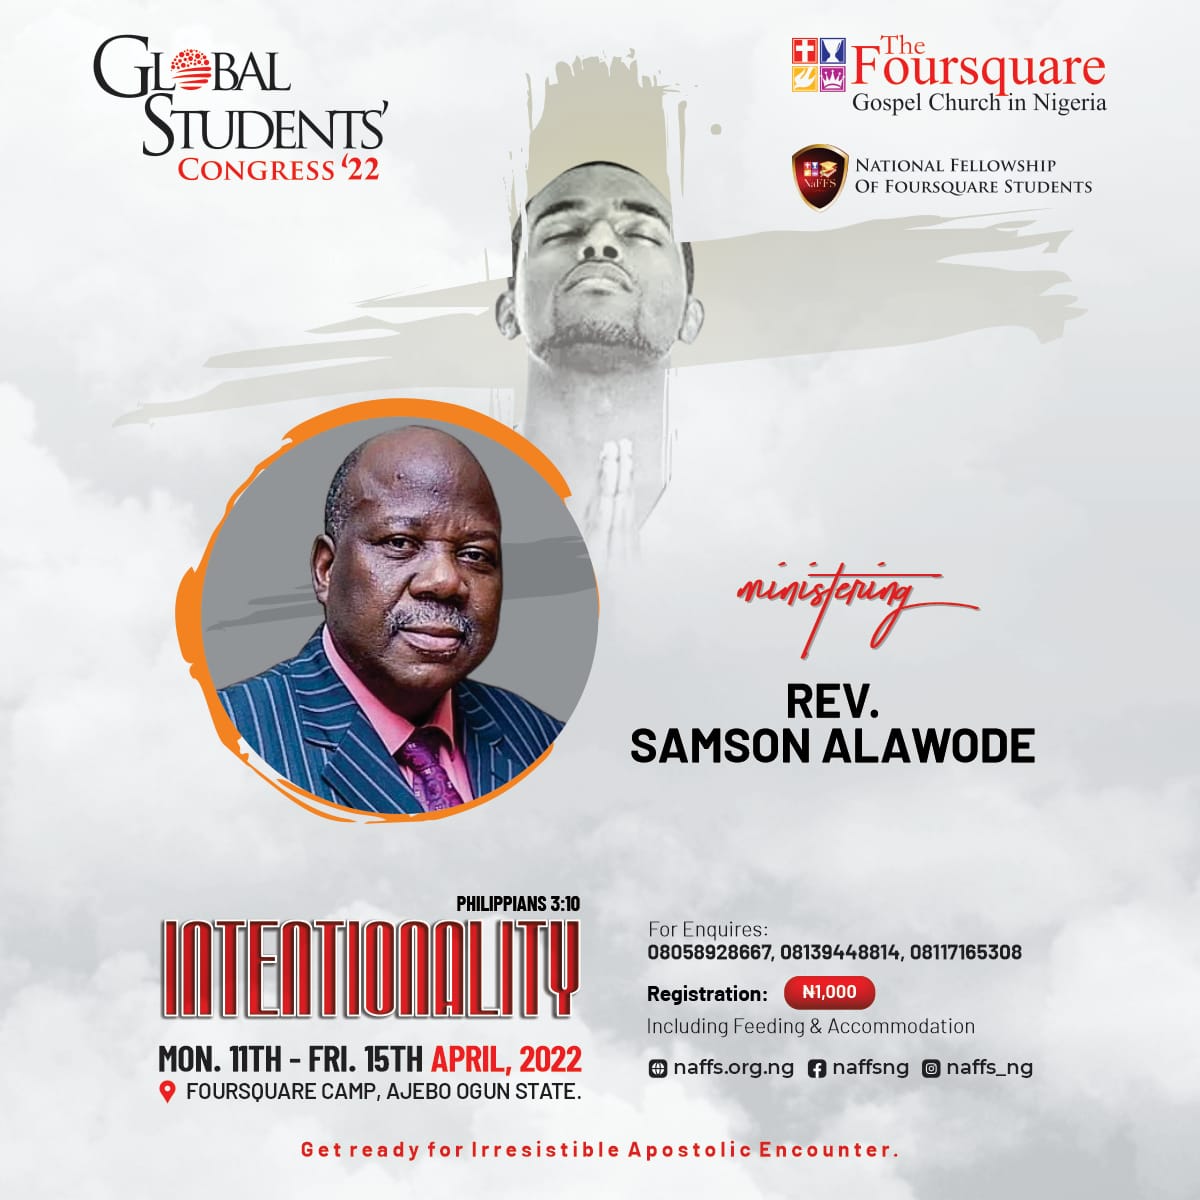 Join Rev. Samson Alawode at GSC '22 from Monday, 11th - Friday, 15th April, 2022 at Foursquare Camp, Ajebo! Registration covers accommodation and feeding. Register via naffs.org.ng Get ready for an irresistible apostolic encounter! #GSC2022 #Intentionality